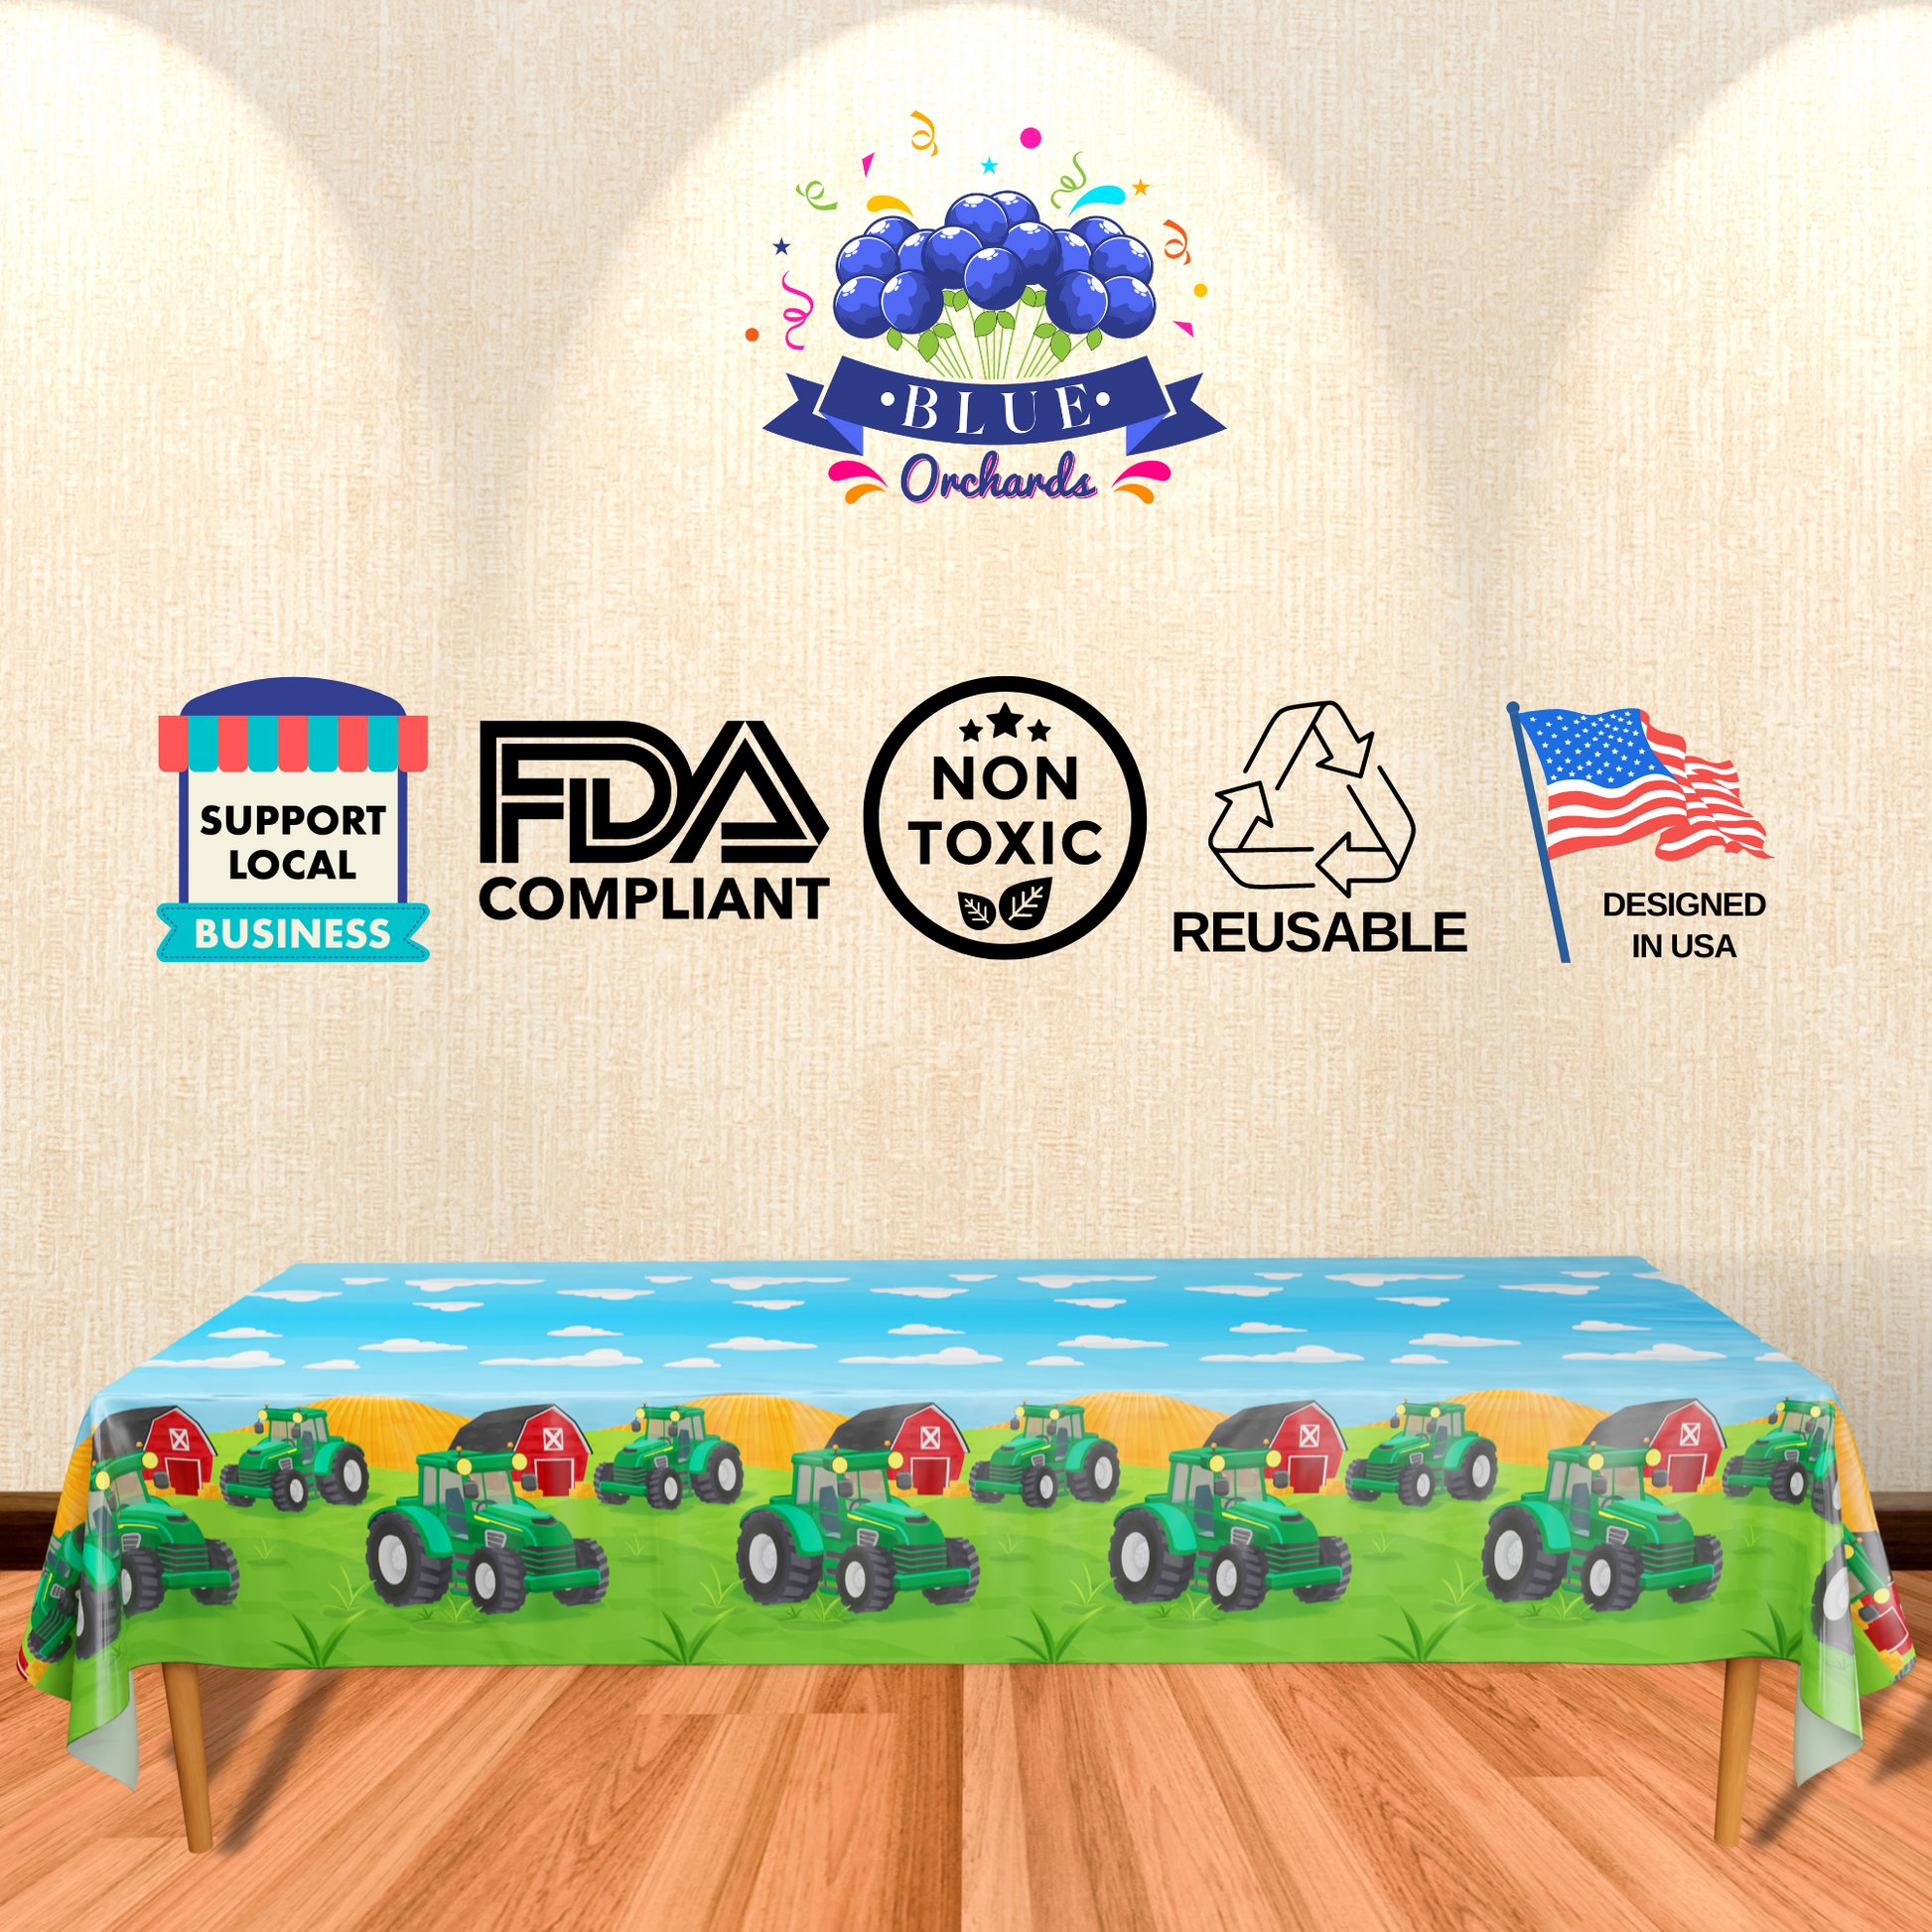 Made with durable materials, these Farm Party Table Covers are great for protecting your tables while adding a decorative touch.